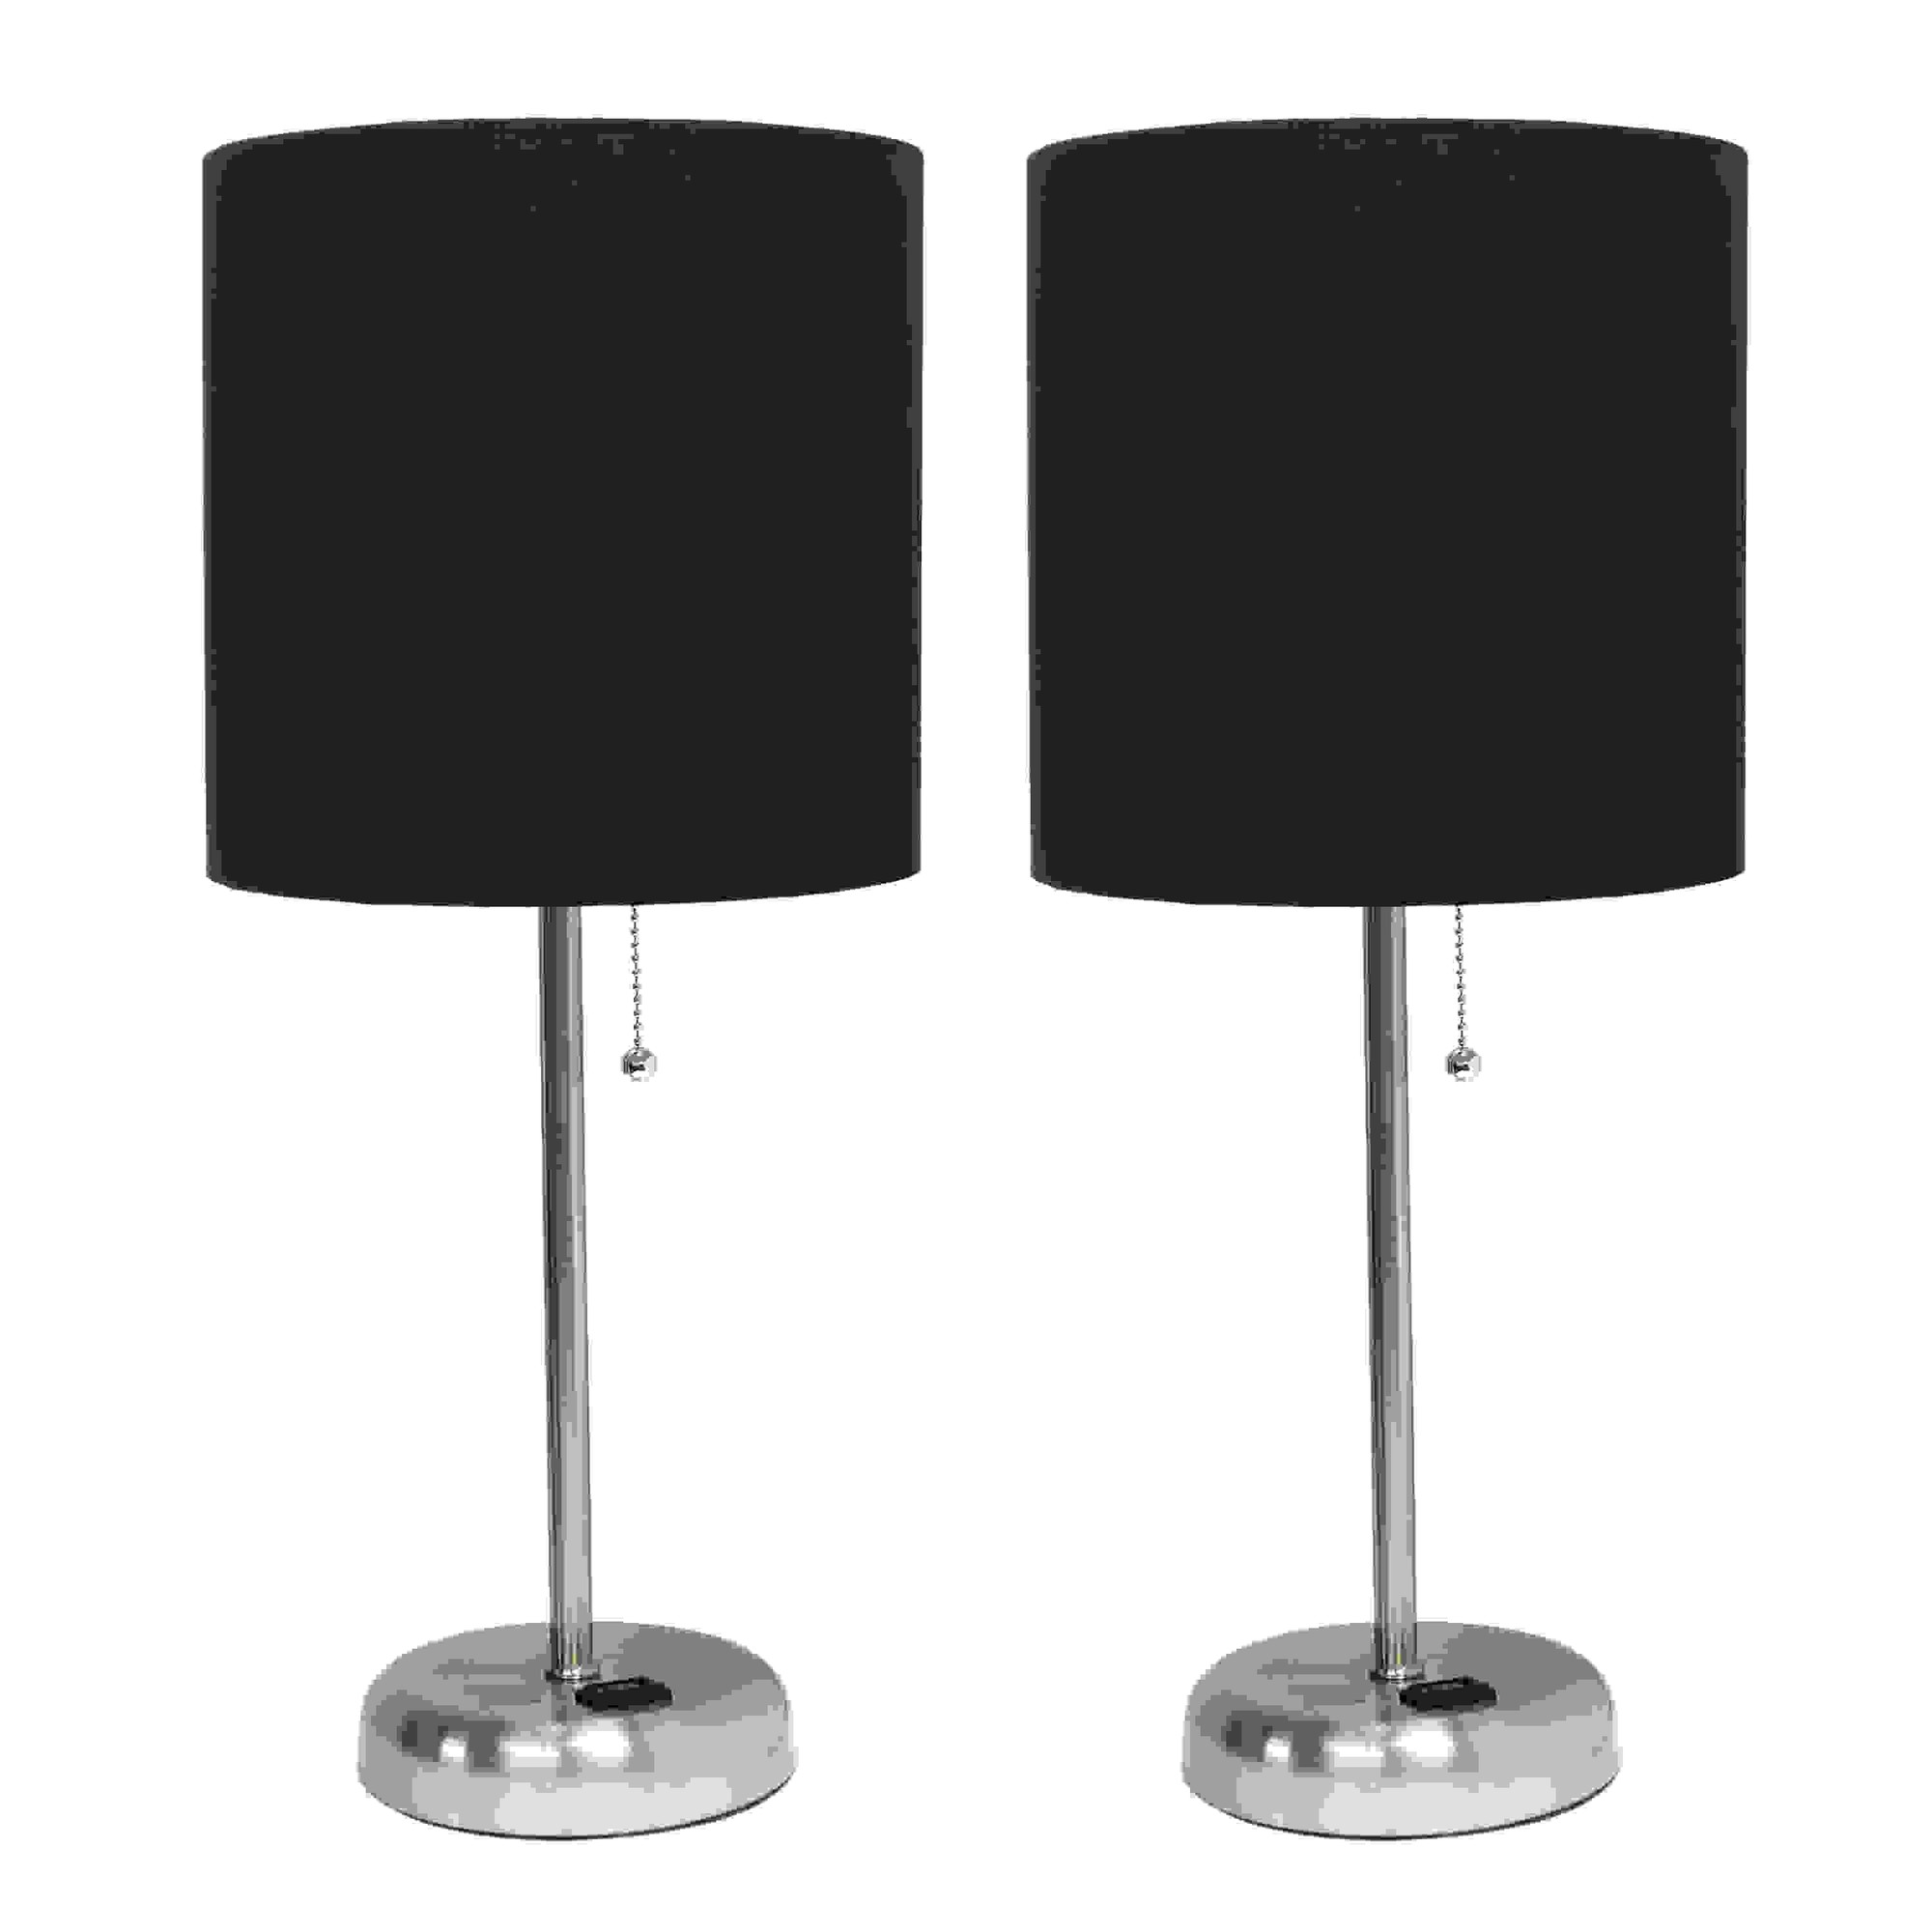 Simple Designs Brushed Steel Stick Lamp with Charging Outlet and Fabric Shade 2 Pack Set, Black